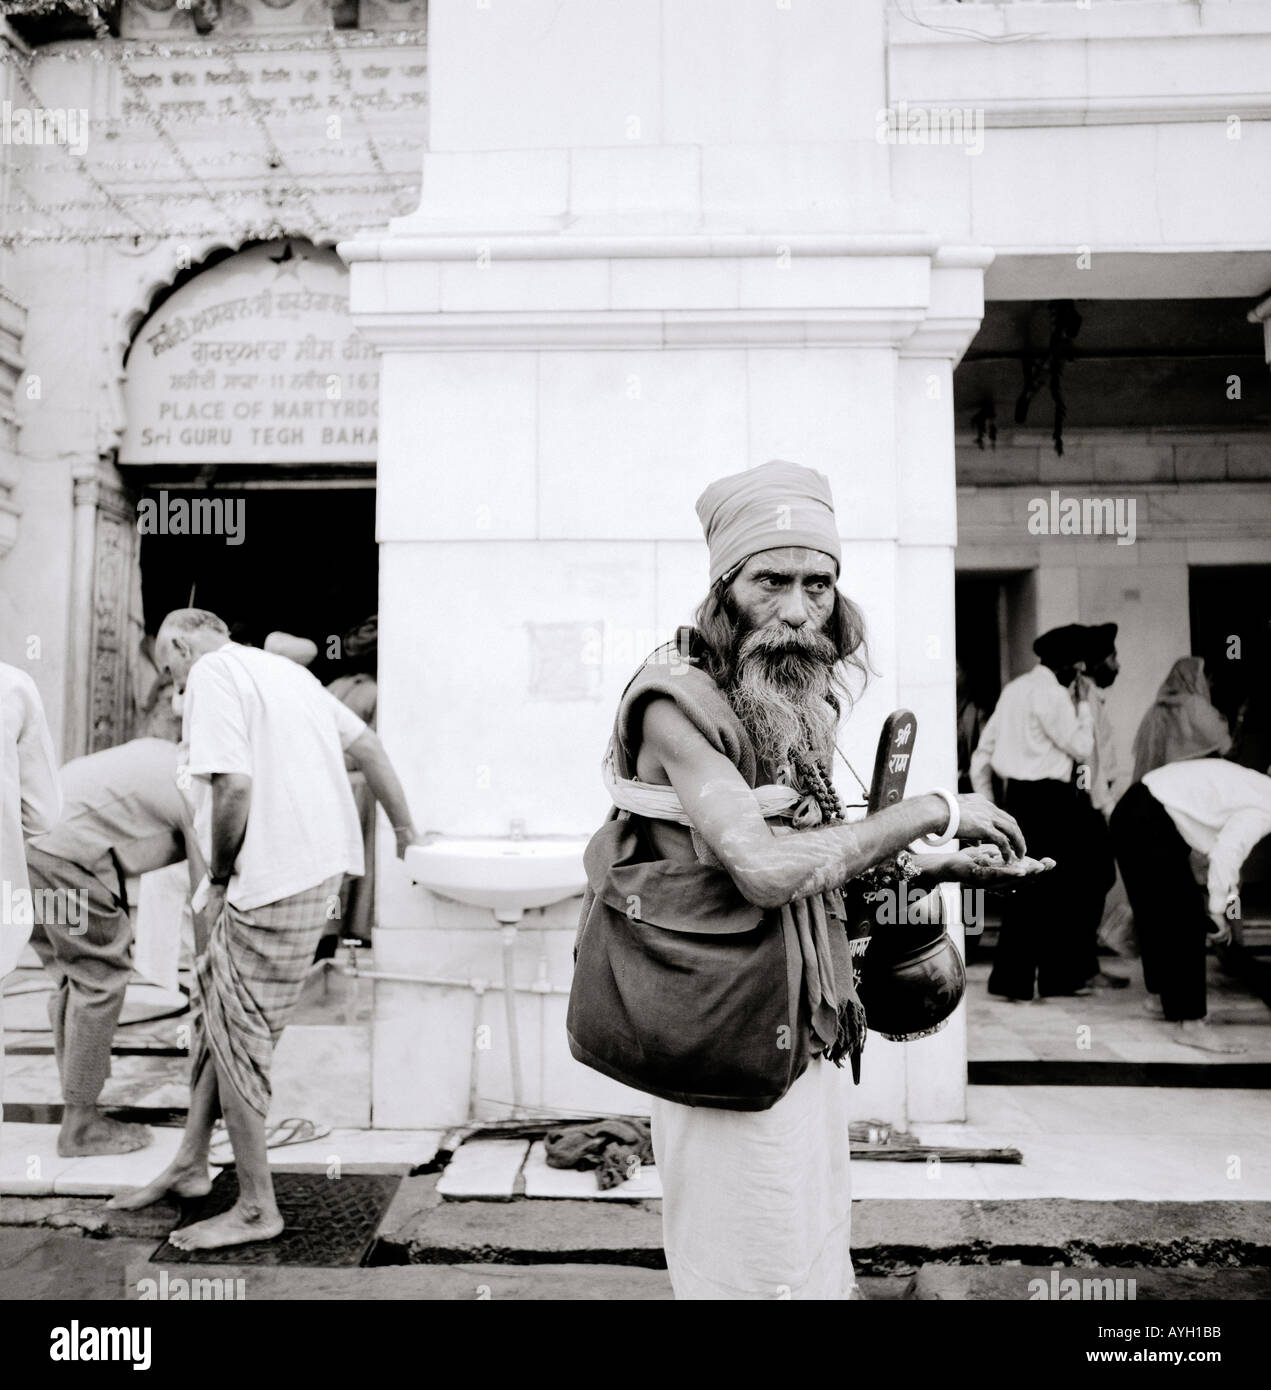 A Hindu holy man in Chandni Chowk in New Delhi in India in South Asia. People Poverty Life Lifestyle Culture City Cities Reportage Travel Stock Photo